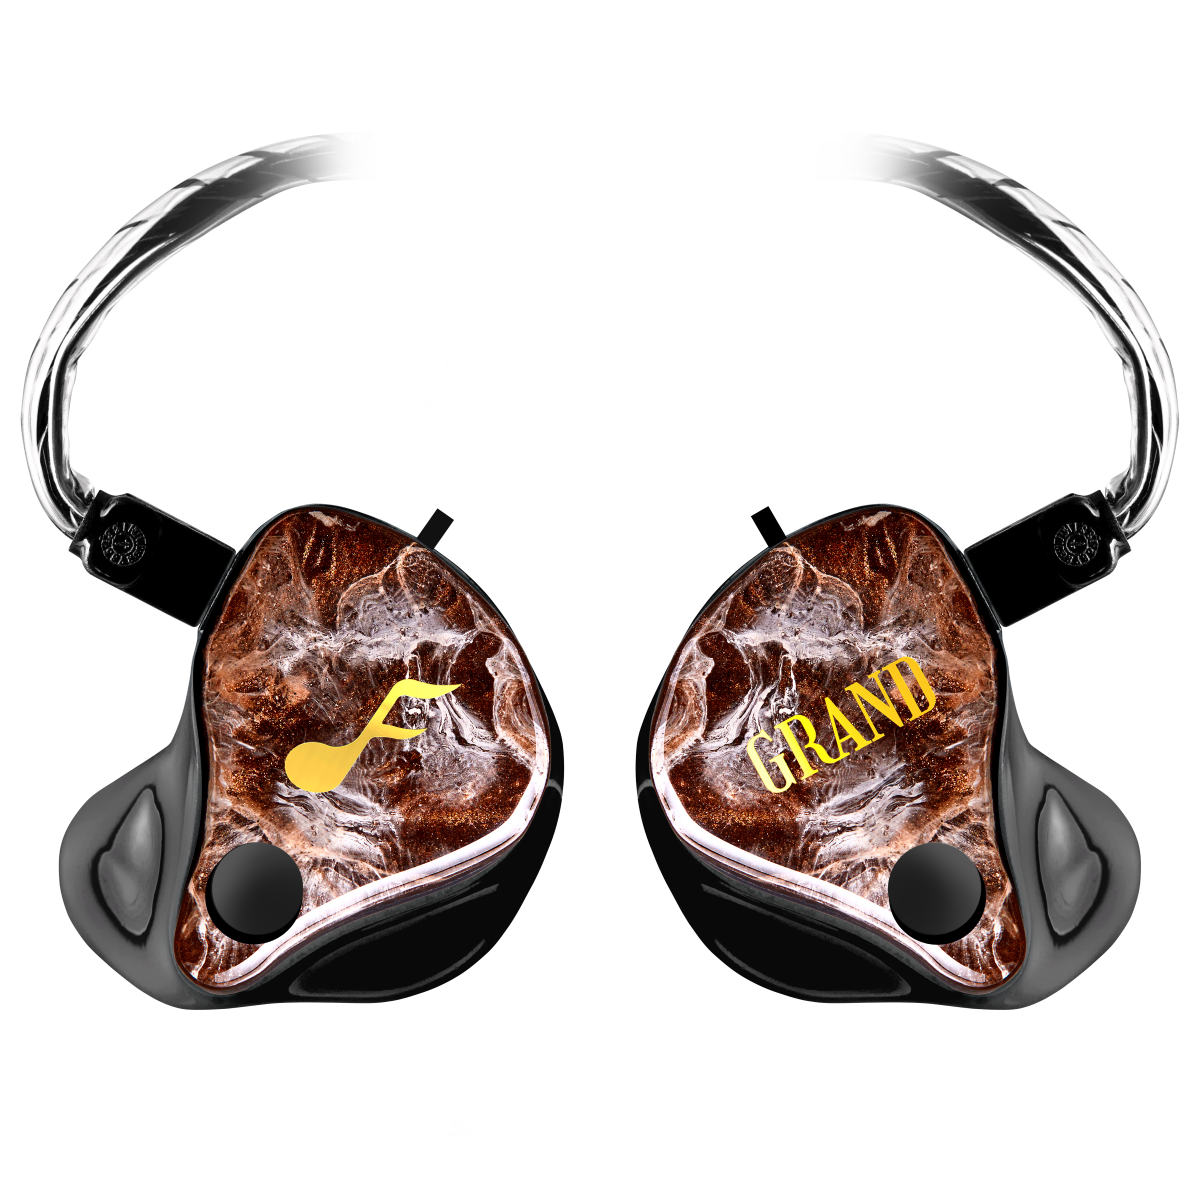 GRAND Maestro Custom IEM - Prices from 5201.00 to 5295.00